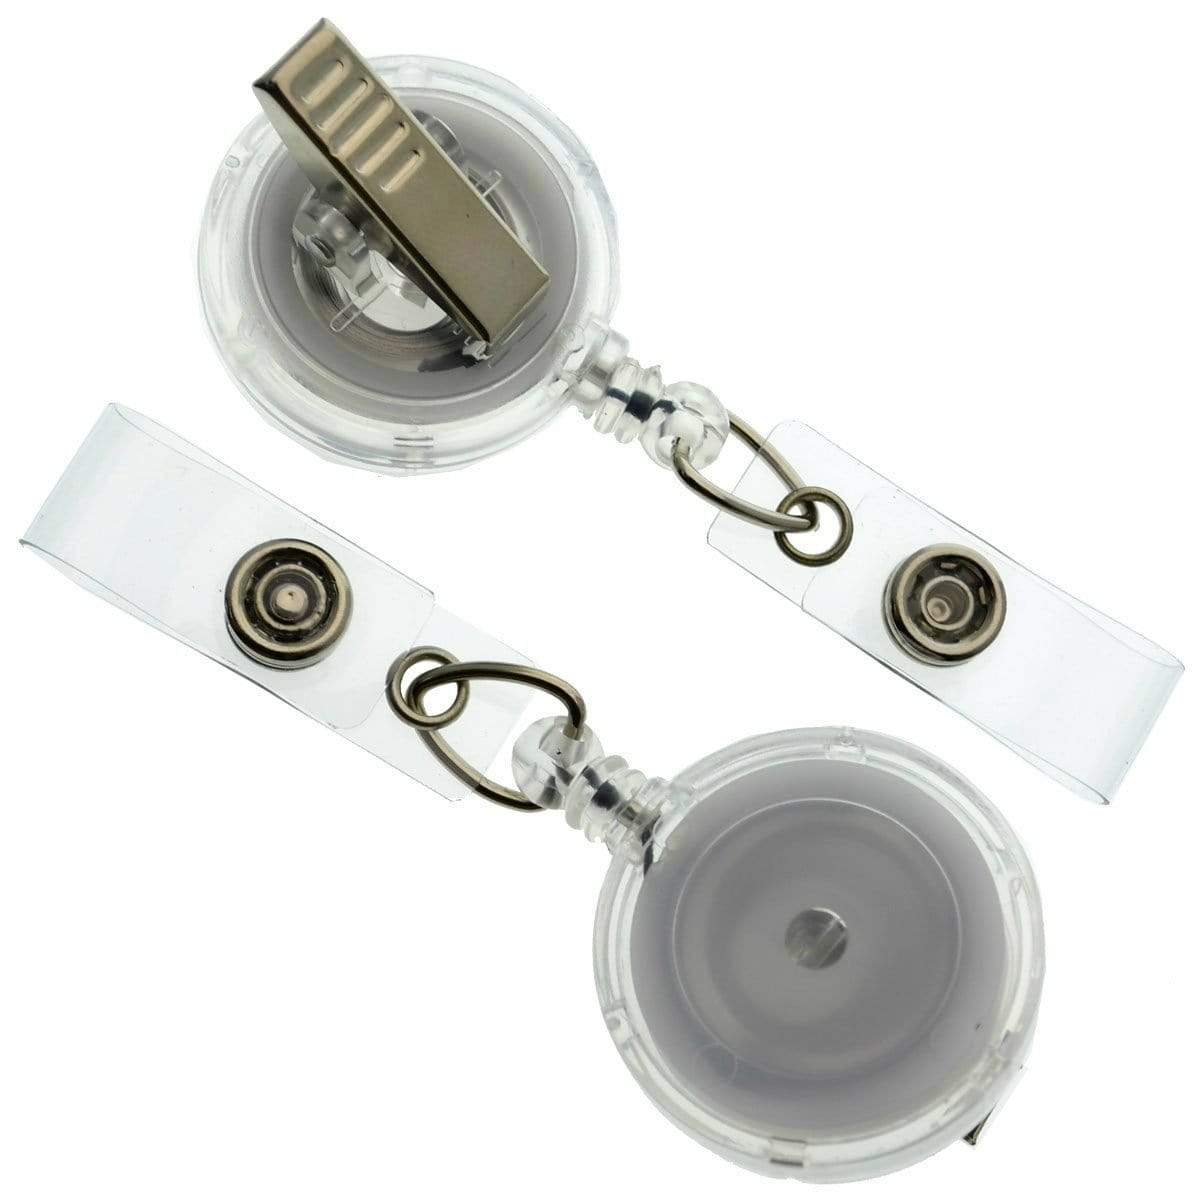 Translucent Badge Reel with Swivel Clip (p/n 2120-762X)